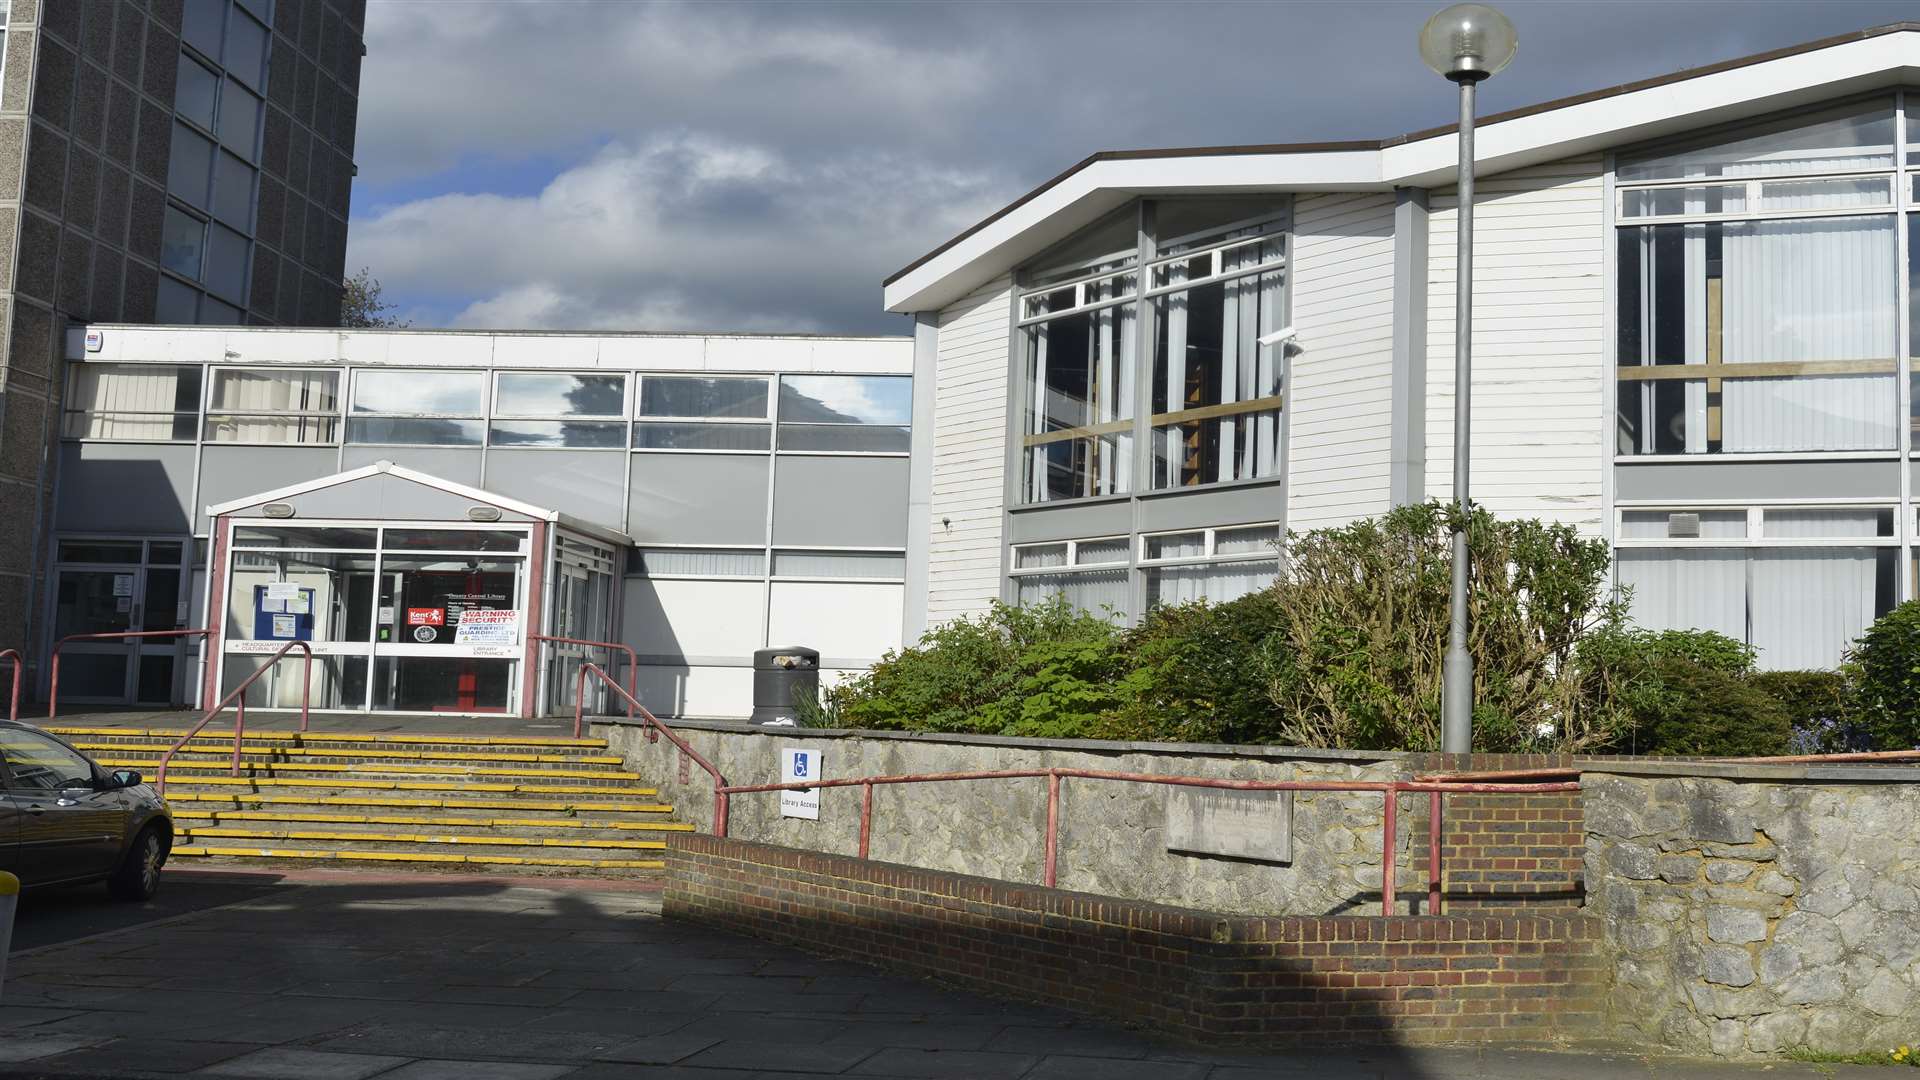 Springfield Library was on the market for £2.8m